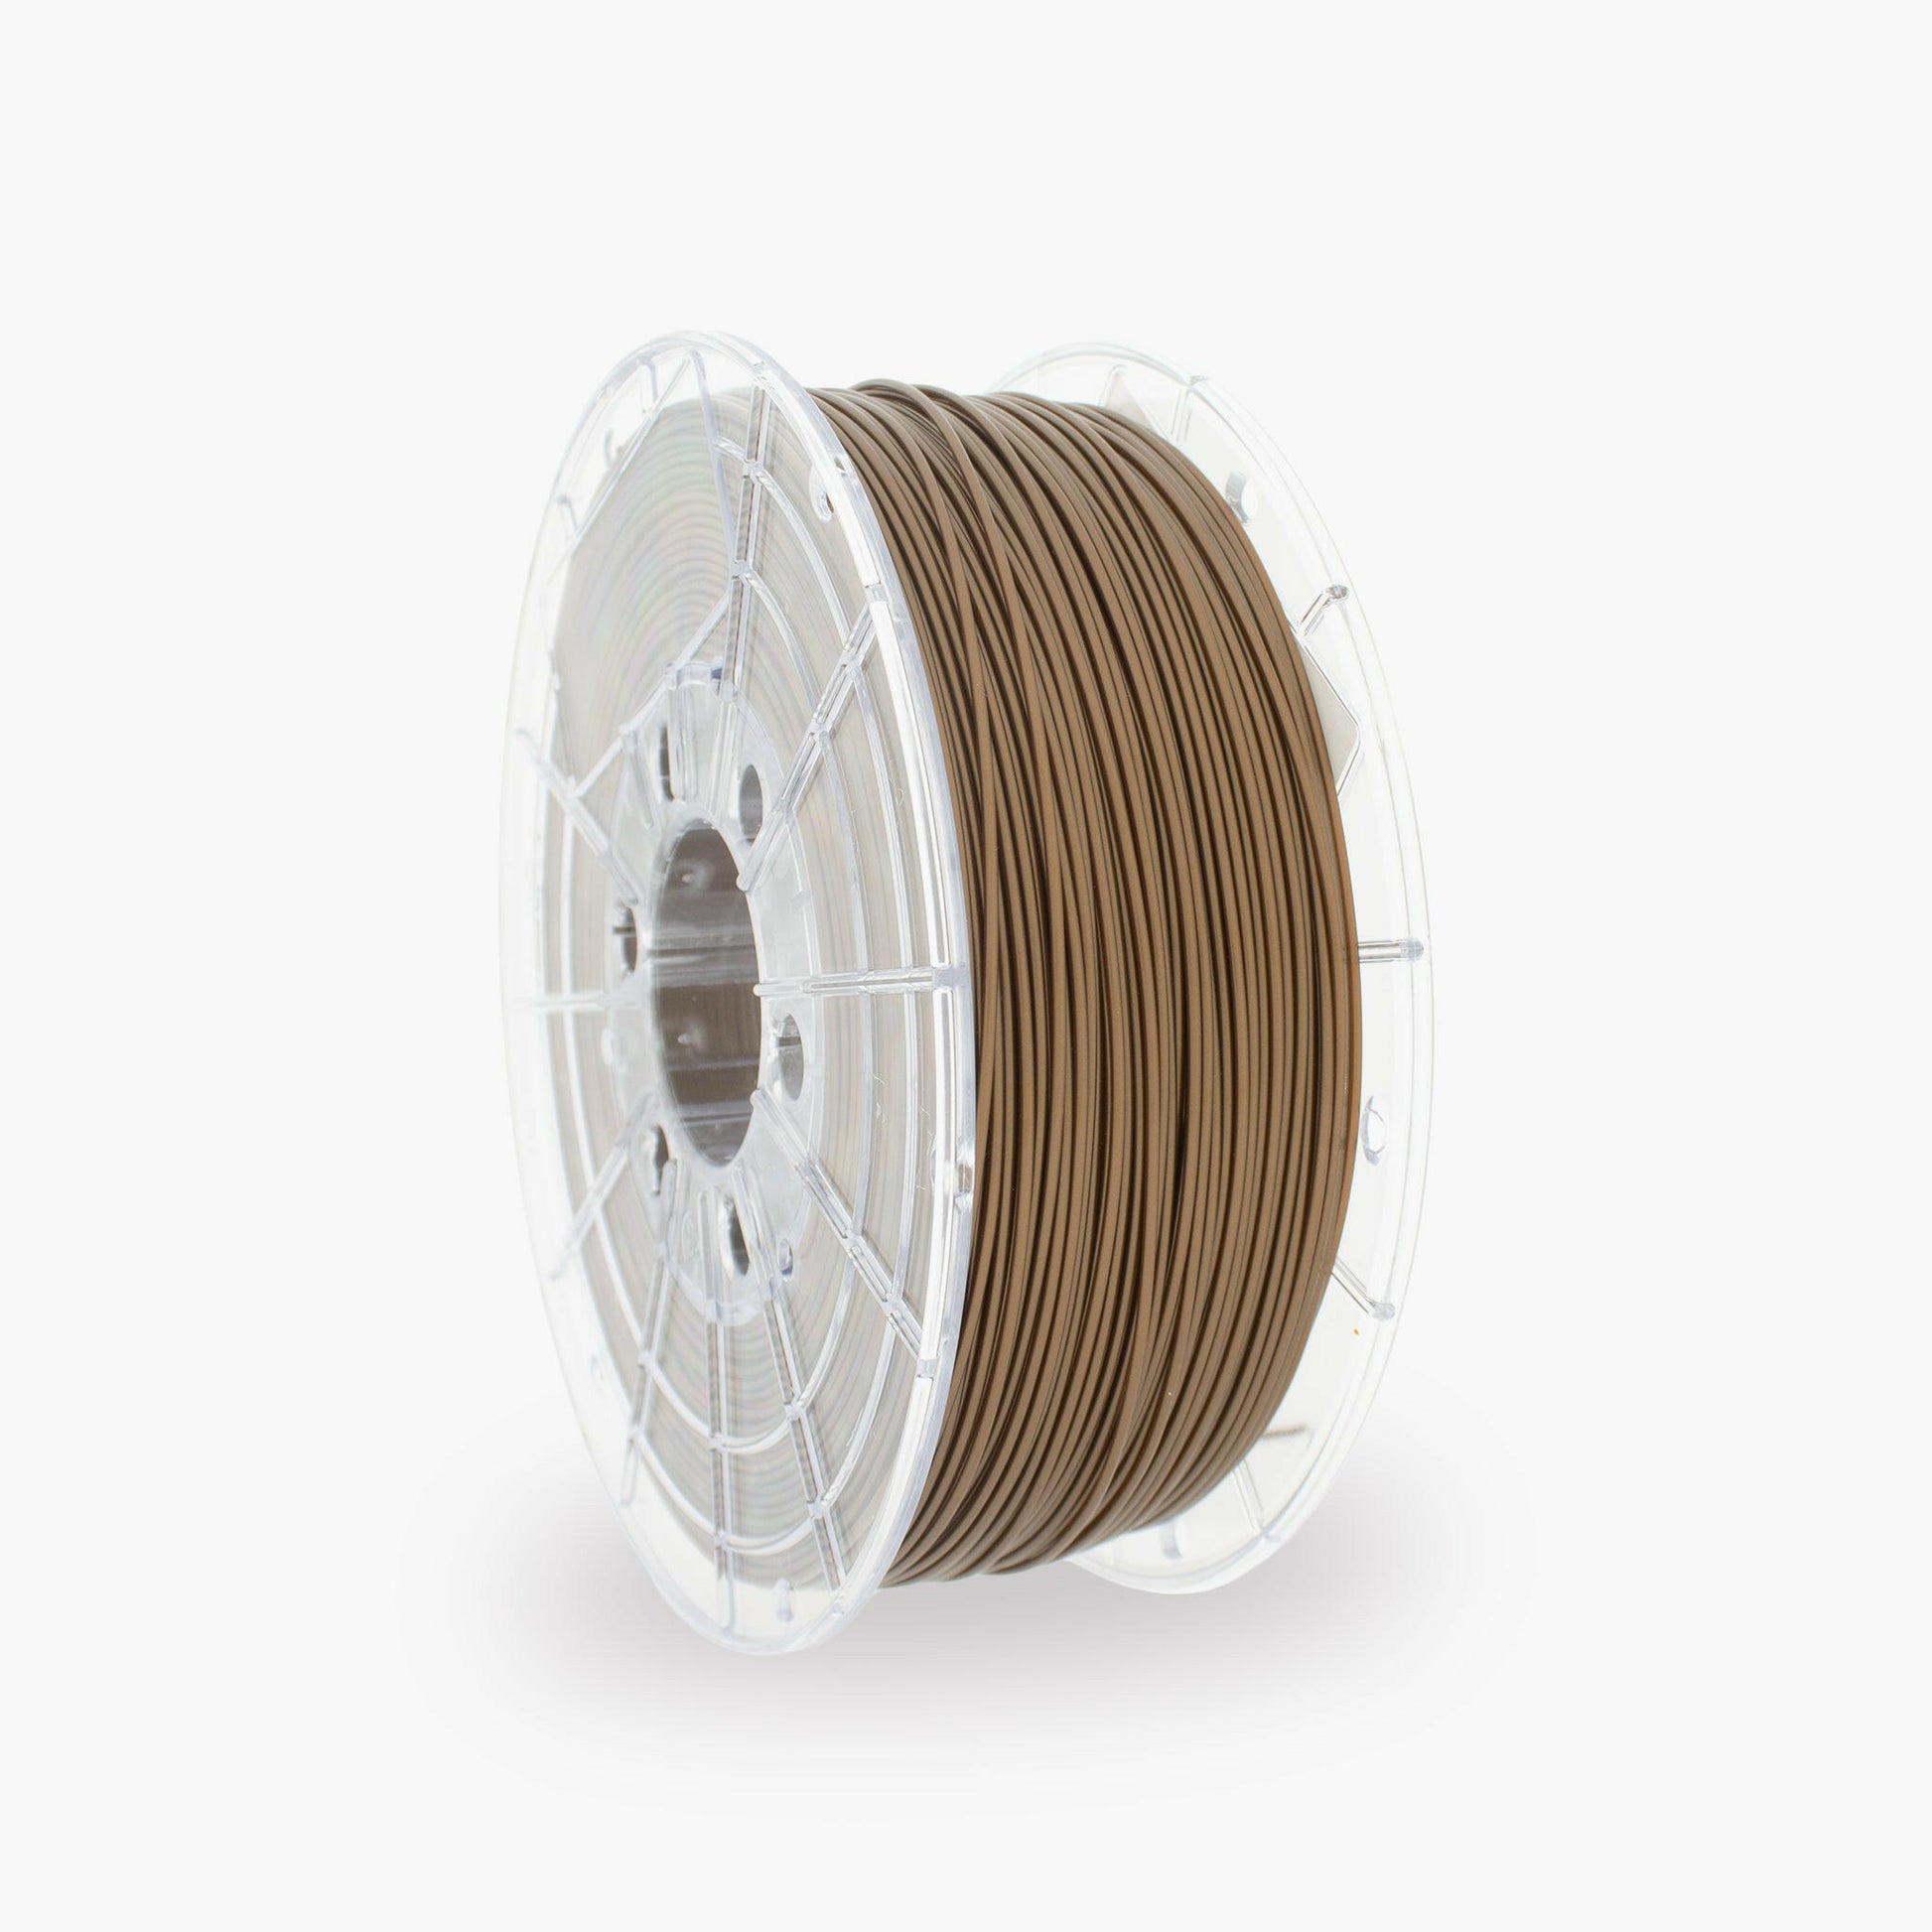 Bronze PETG 3D Printer Filament with a diameter of 1.75mm on a 1KG Spool.